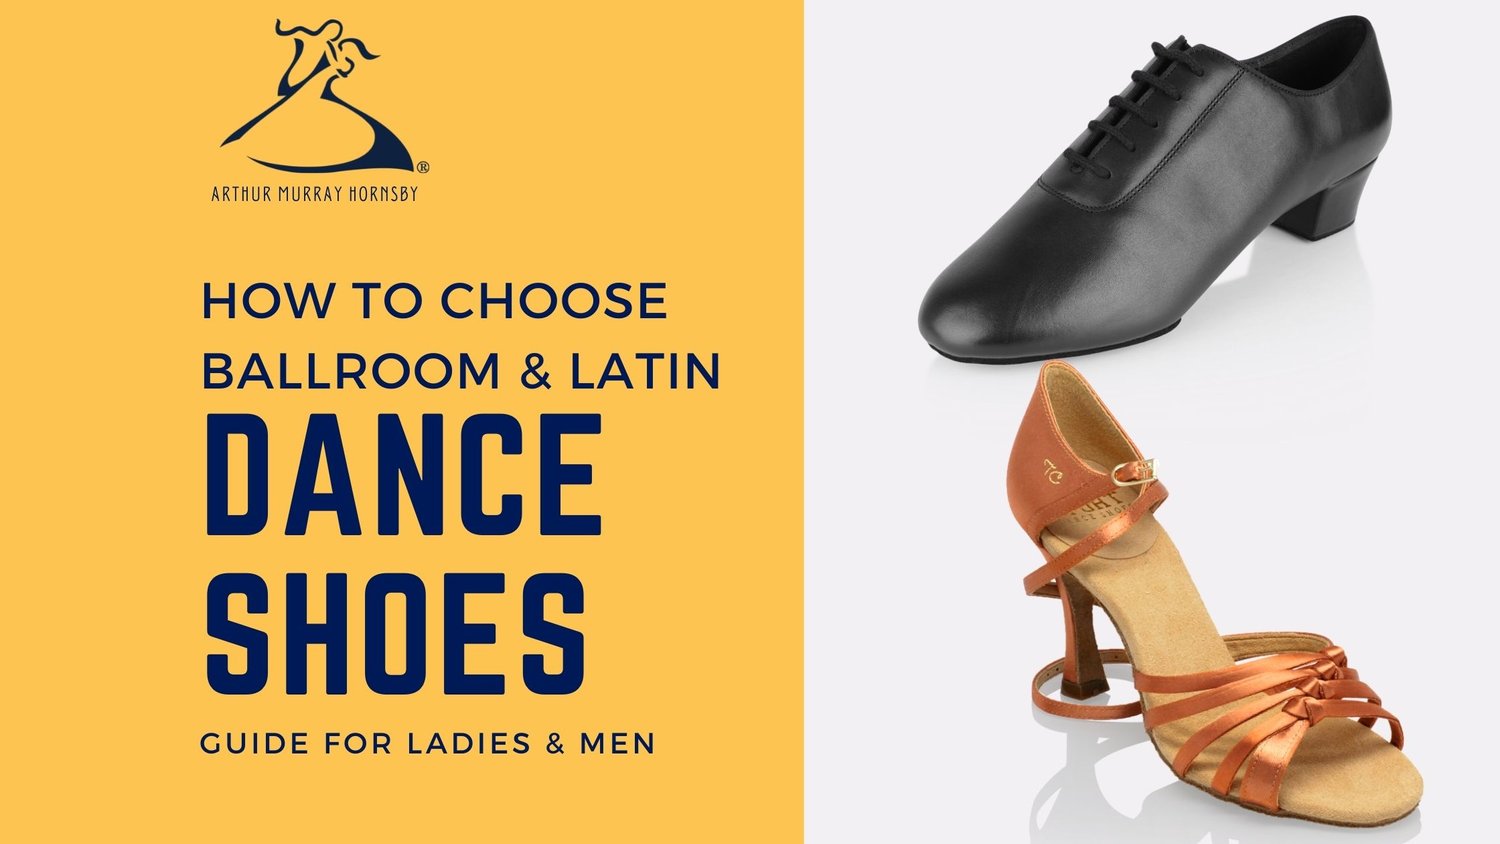 How To Choose Ballroom & Latin Dance Shoes: Guide for Ladies & Men